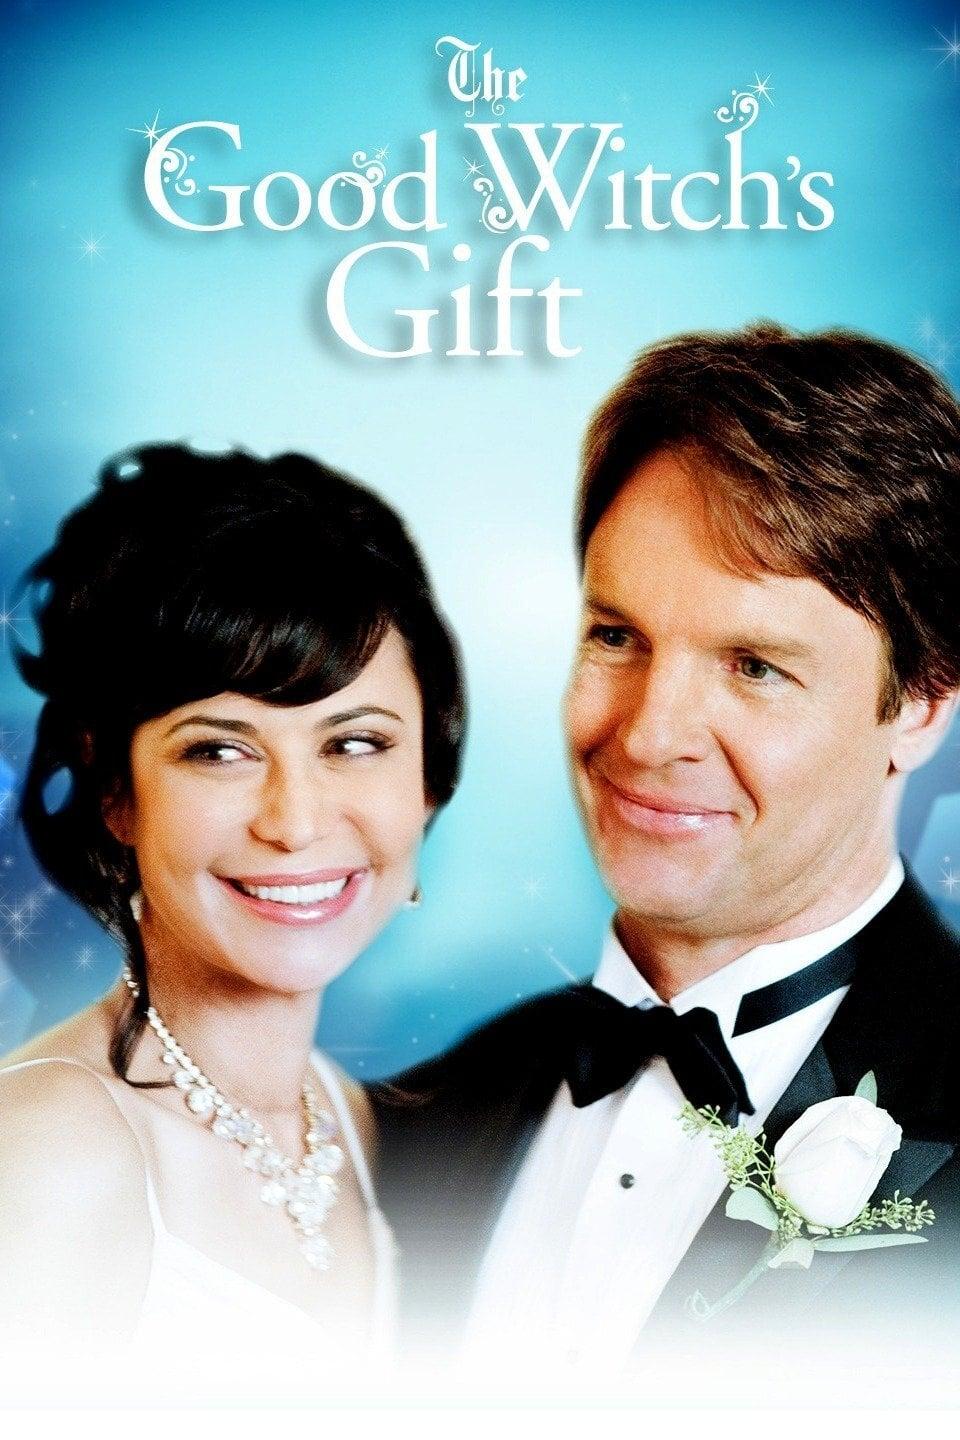 The Good Witch's Gift poster